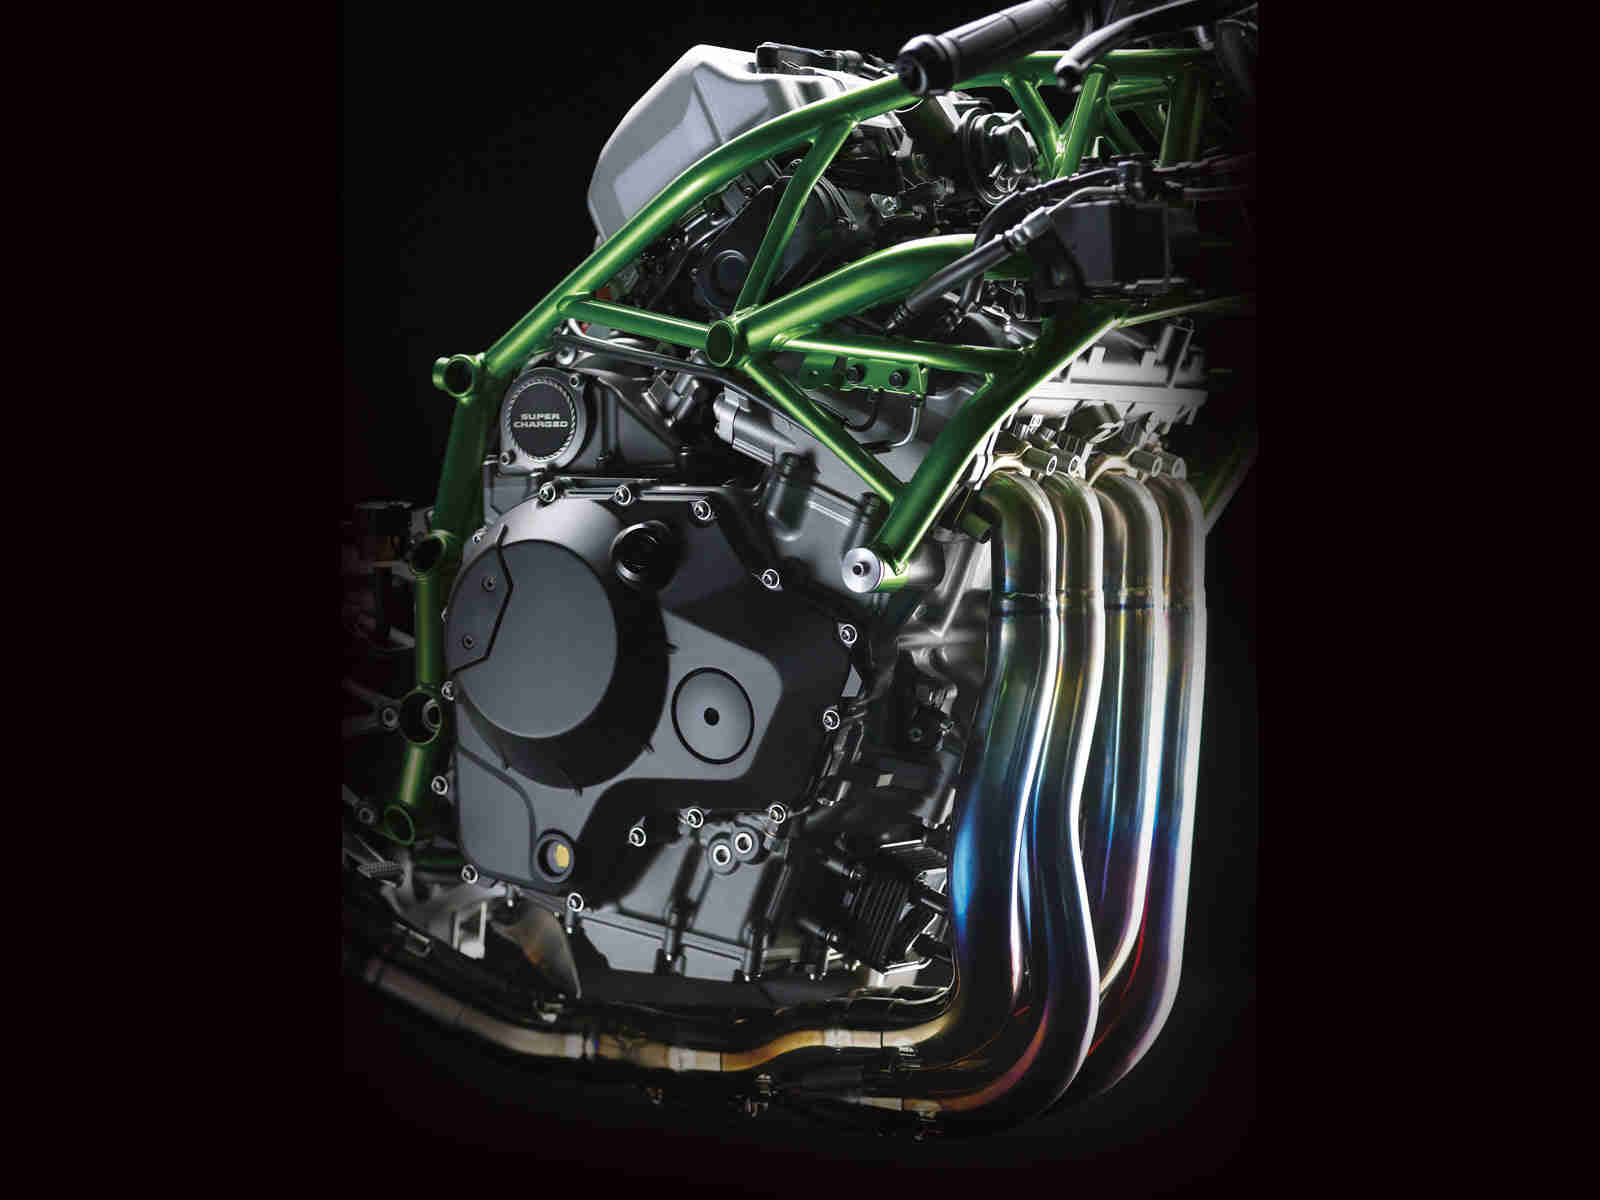 A Kawasaki motorcycle engine against a black background